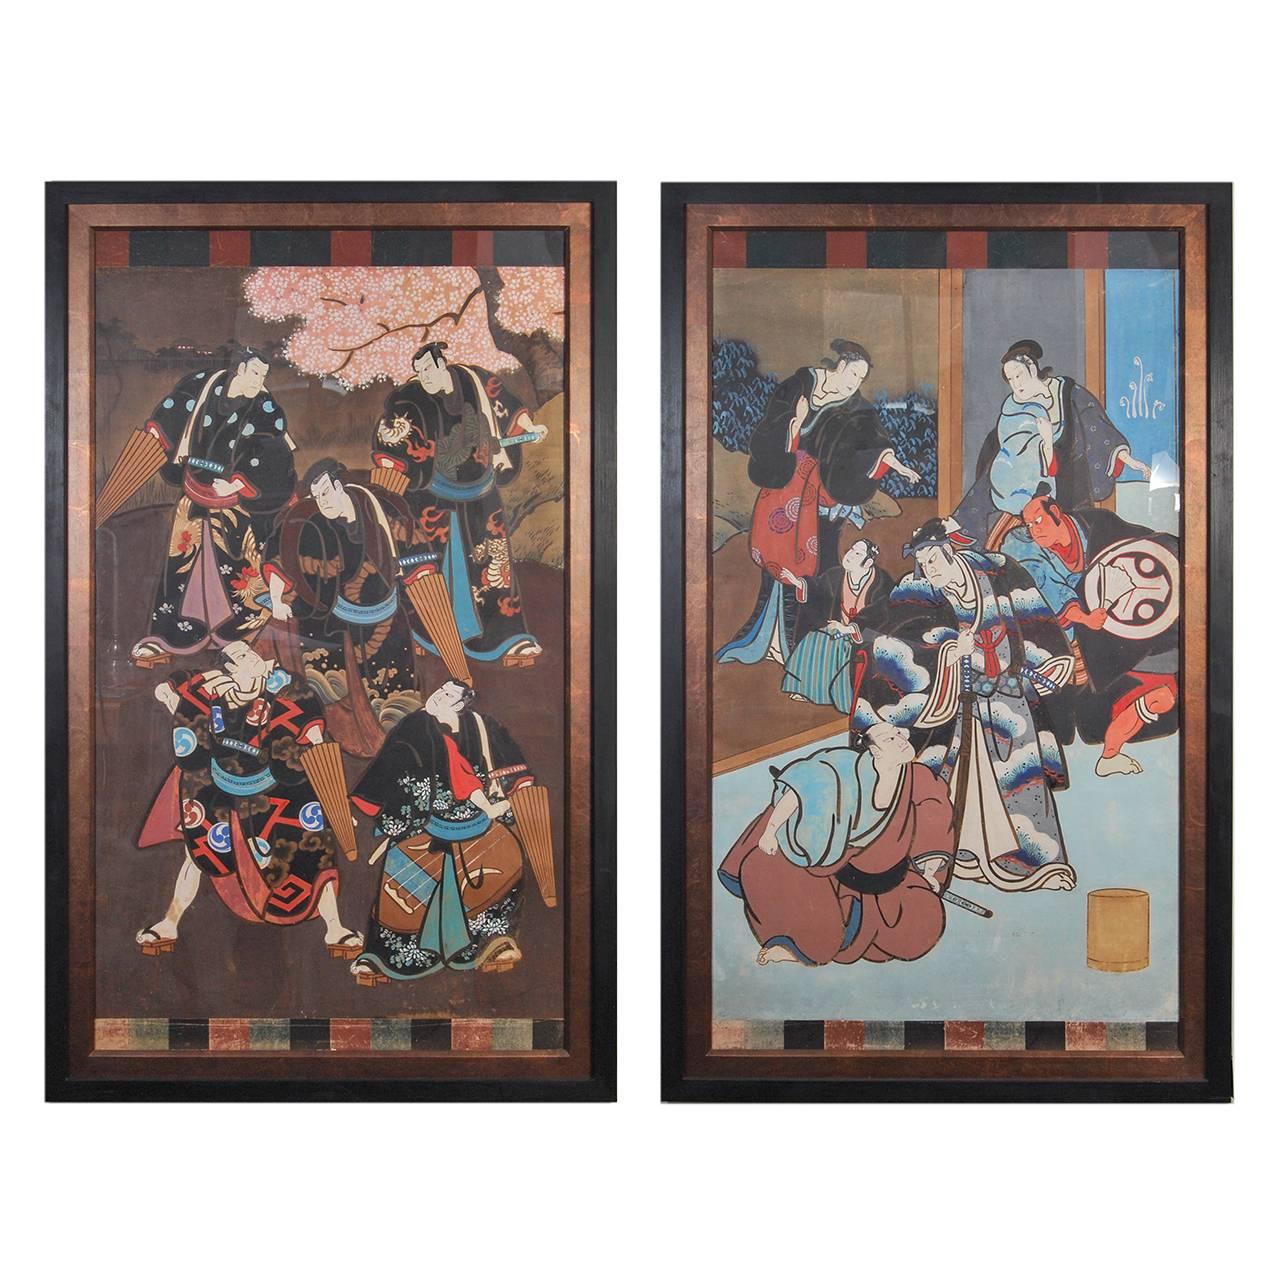 Antique Japanese Hand-Painted Kabuki Theatre Posters, 19th Century